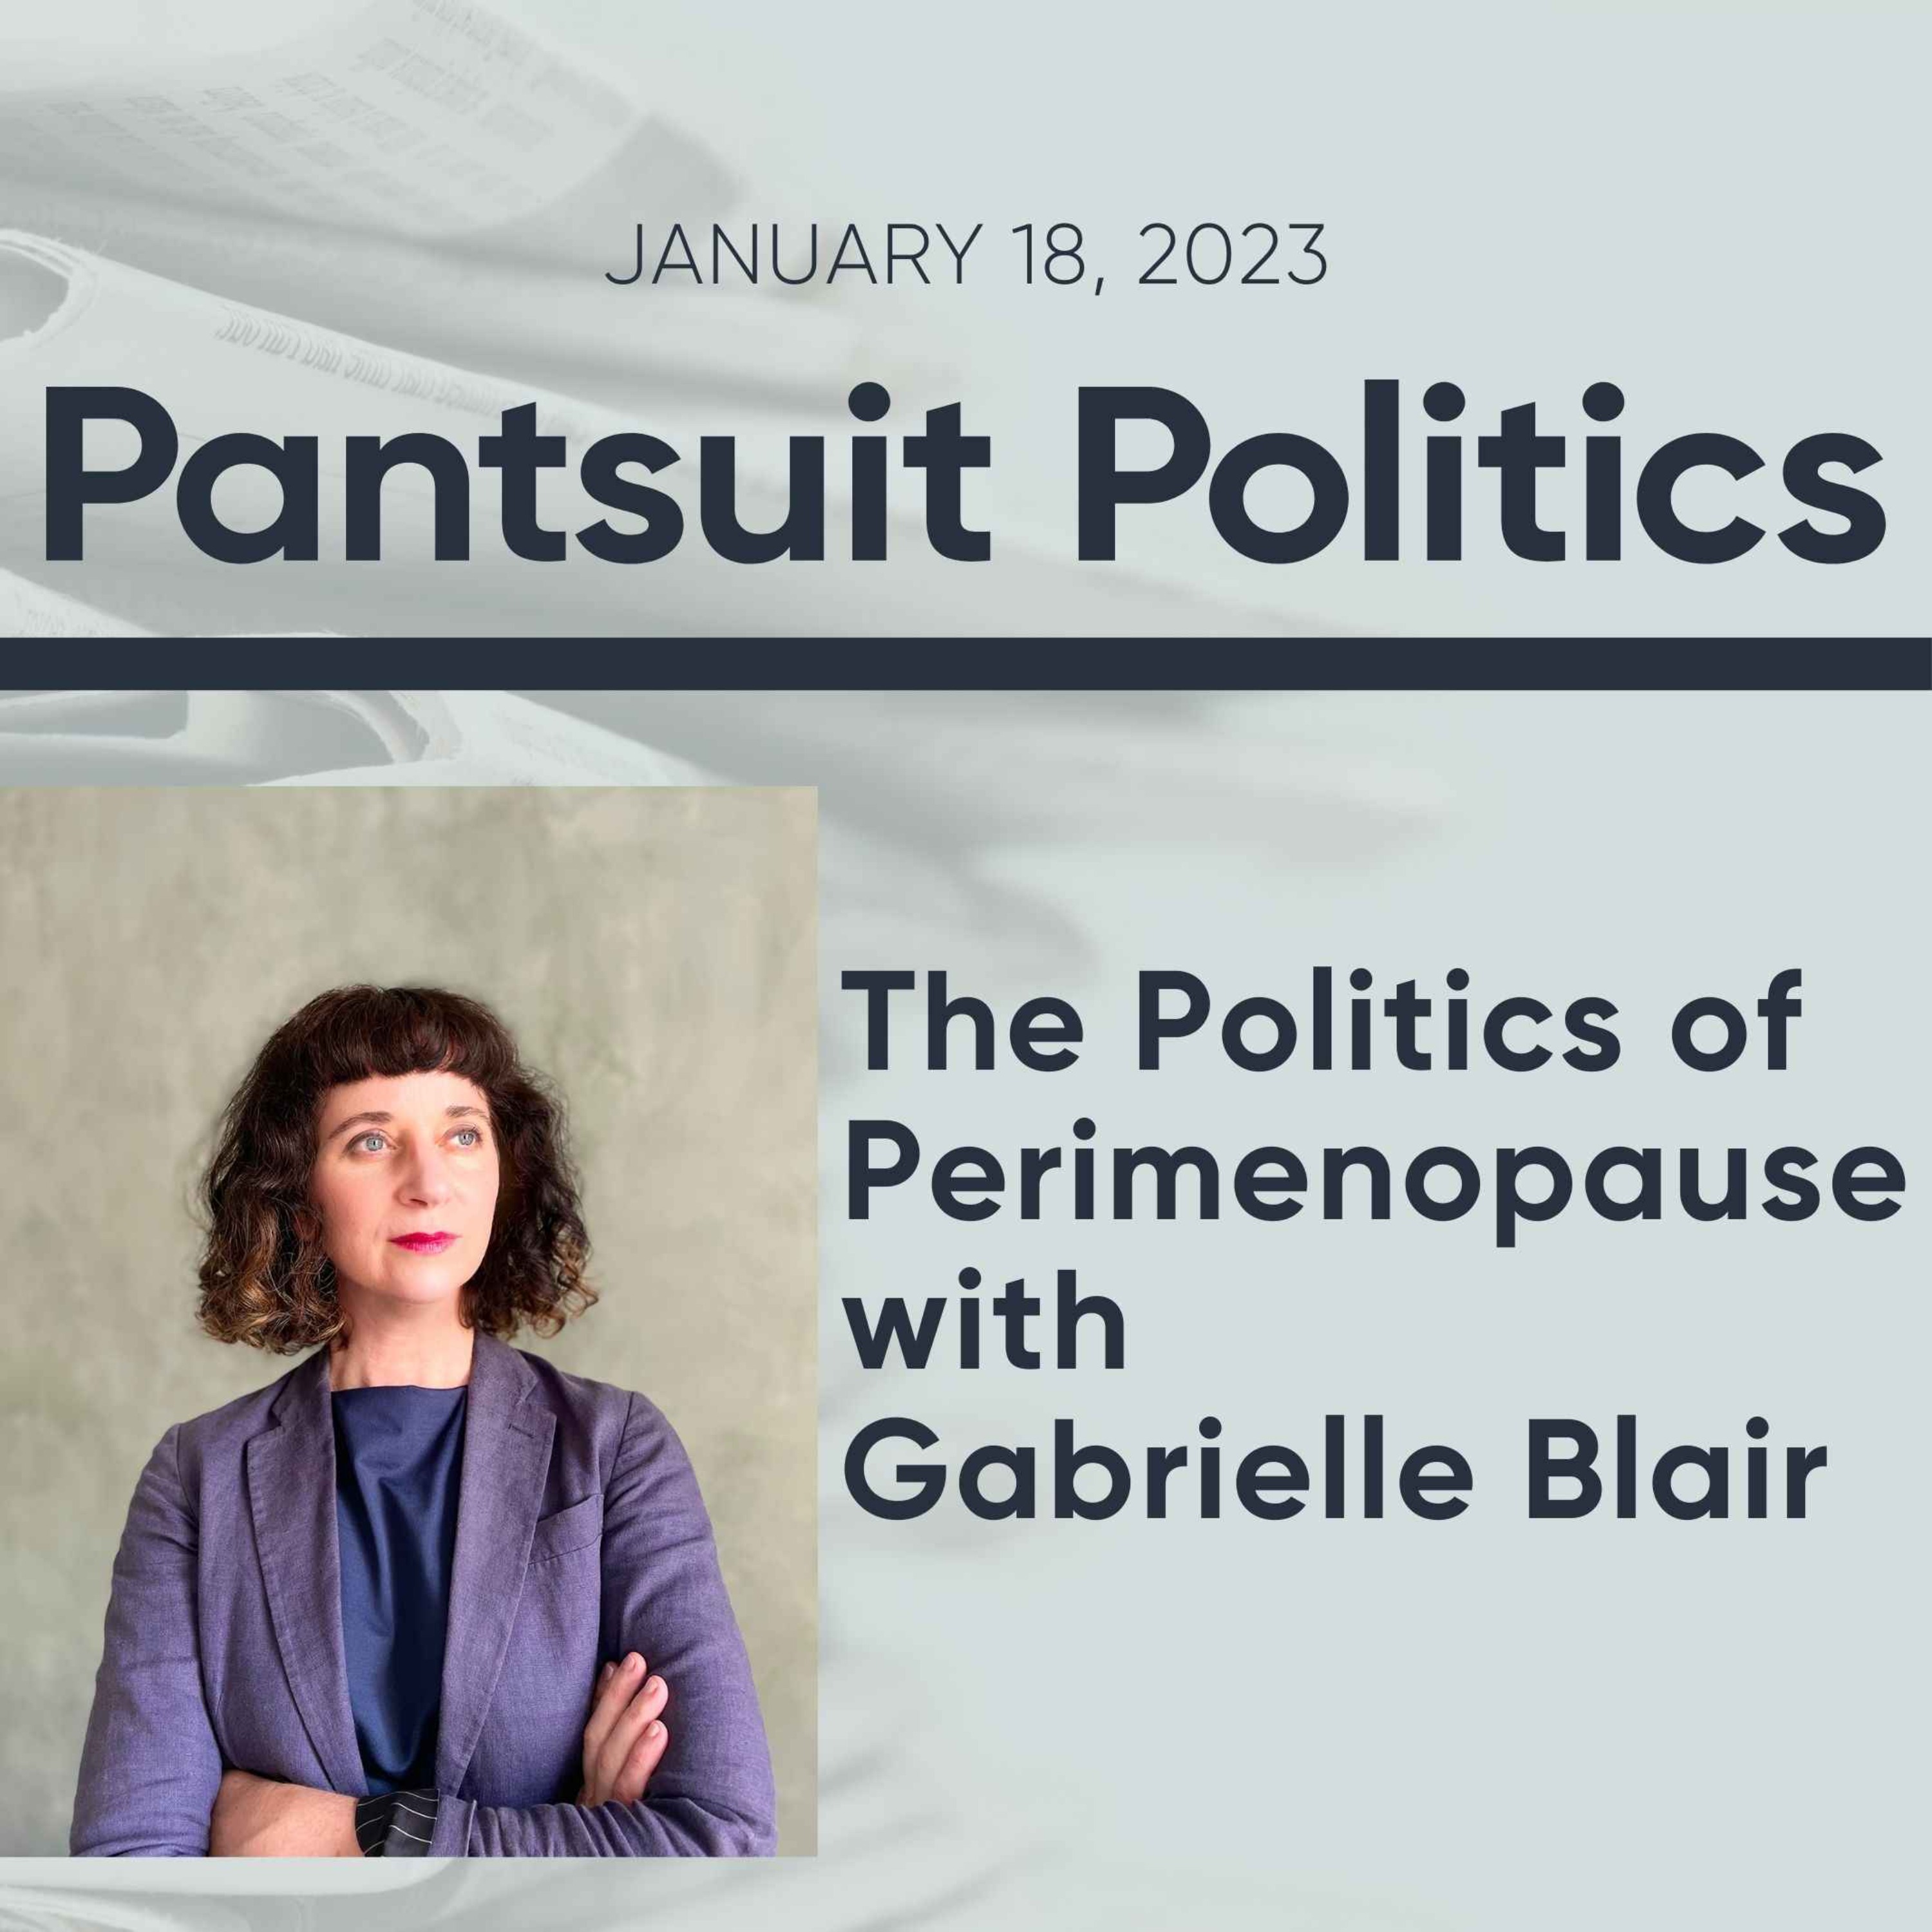 The Politics of Perimenopause with Gabrielle Blair